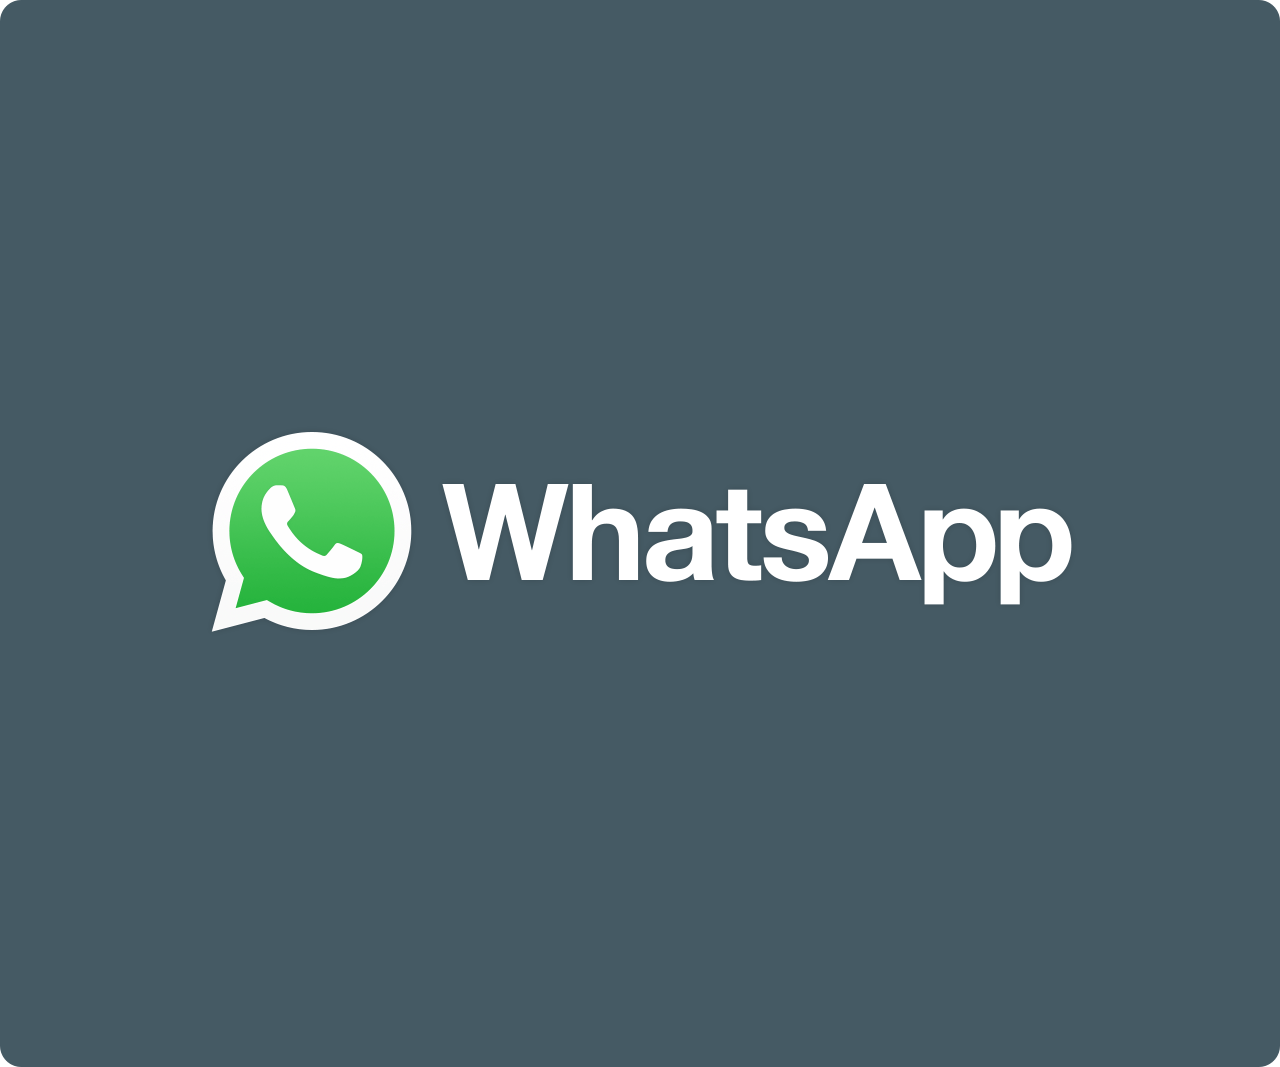 Popular Brands with a Green Logo - WhatsApp Brand Resources